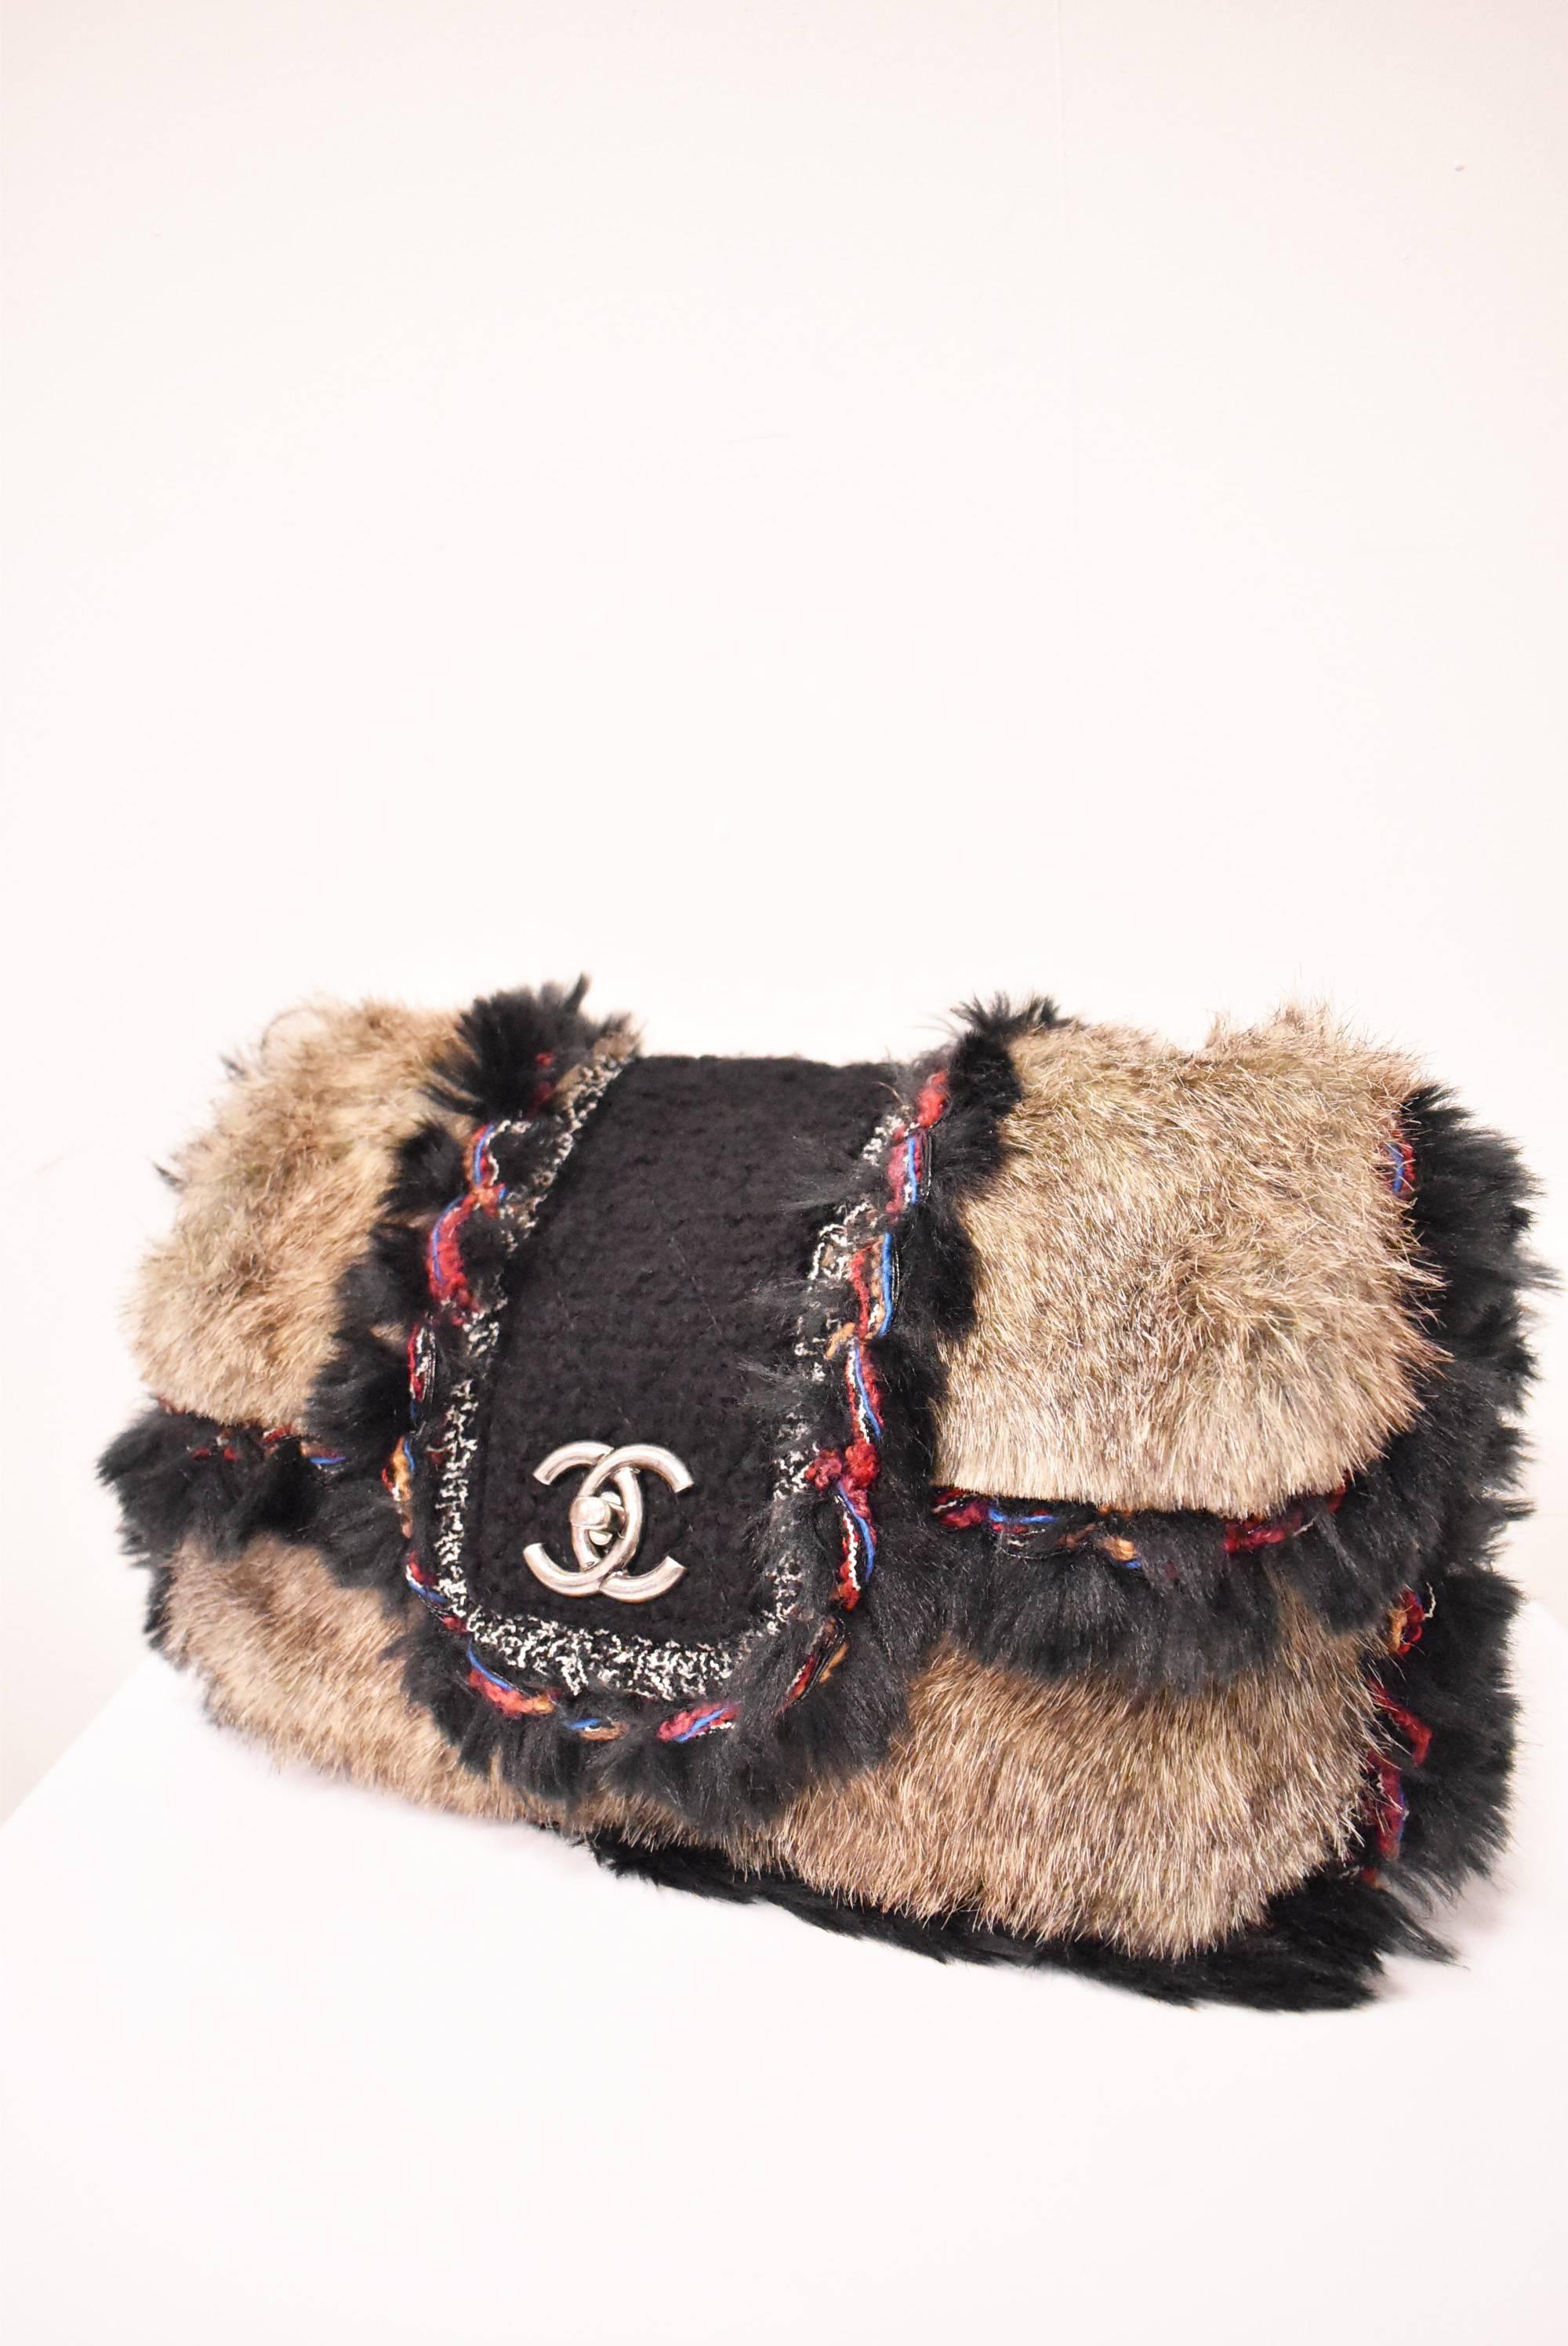 A faux fur and tweed handbag from the Autumn/Winter 2010 Chanel Ready To Wear collection. The bag is a classic two-handle, rectangular bag with a fold-over opening. The clasp has a twist opening featuring the Chanel 'CC' monogram. Th bag is made of